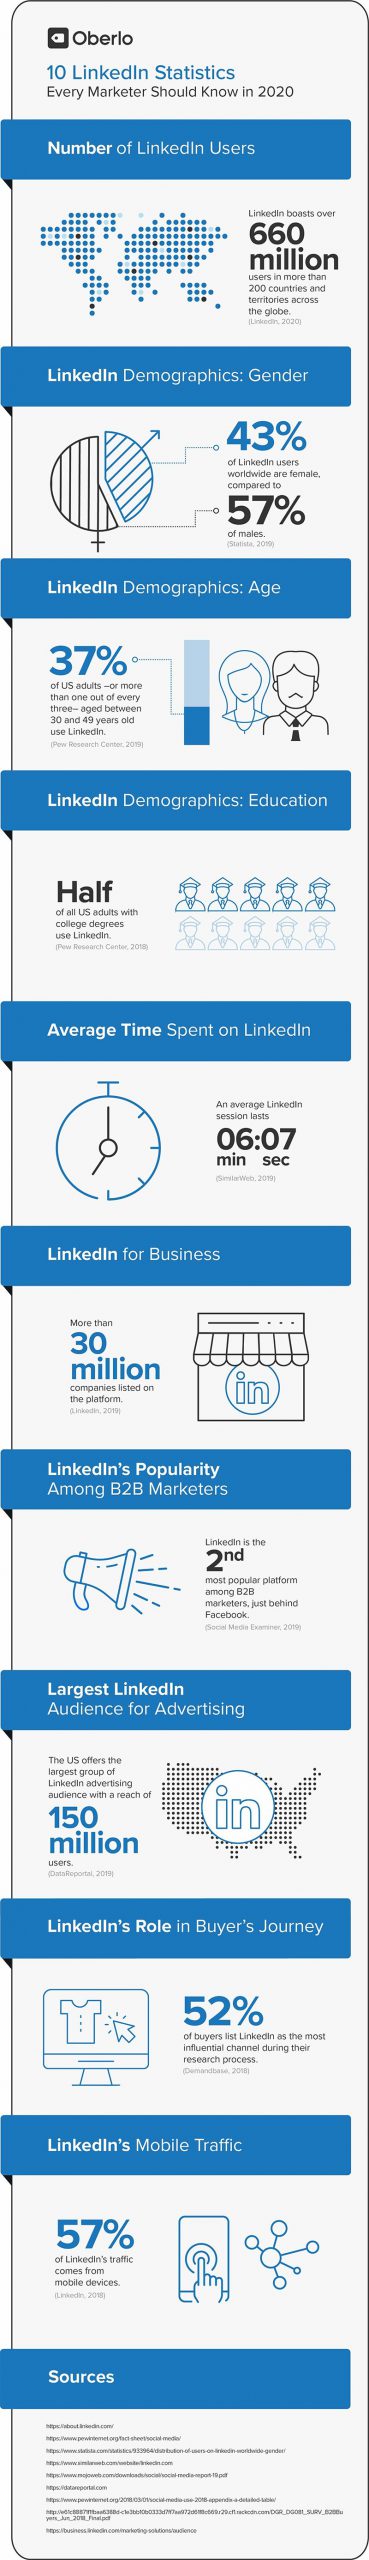 10 linkedin stats to guide your social media marketing strategy in 2020 infographic scaled 1